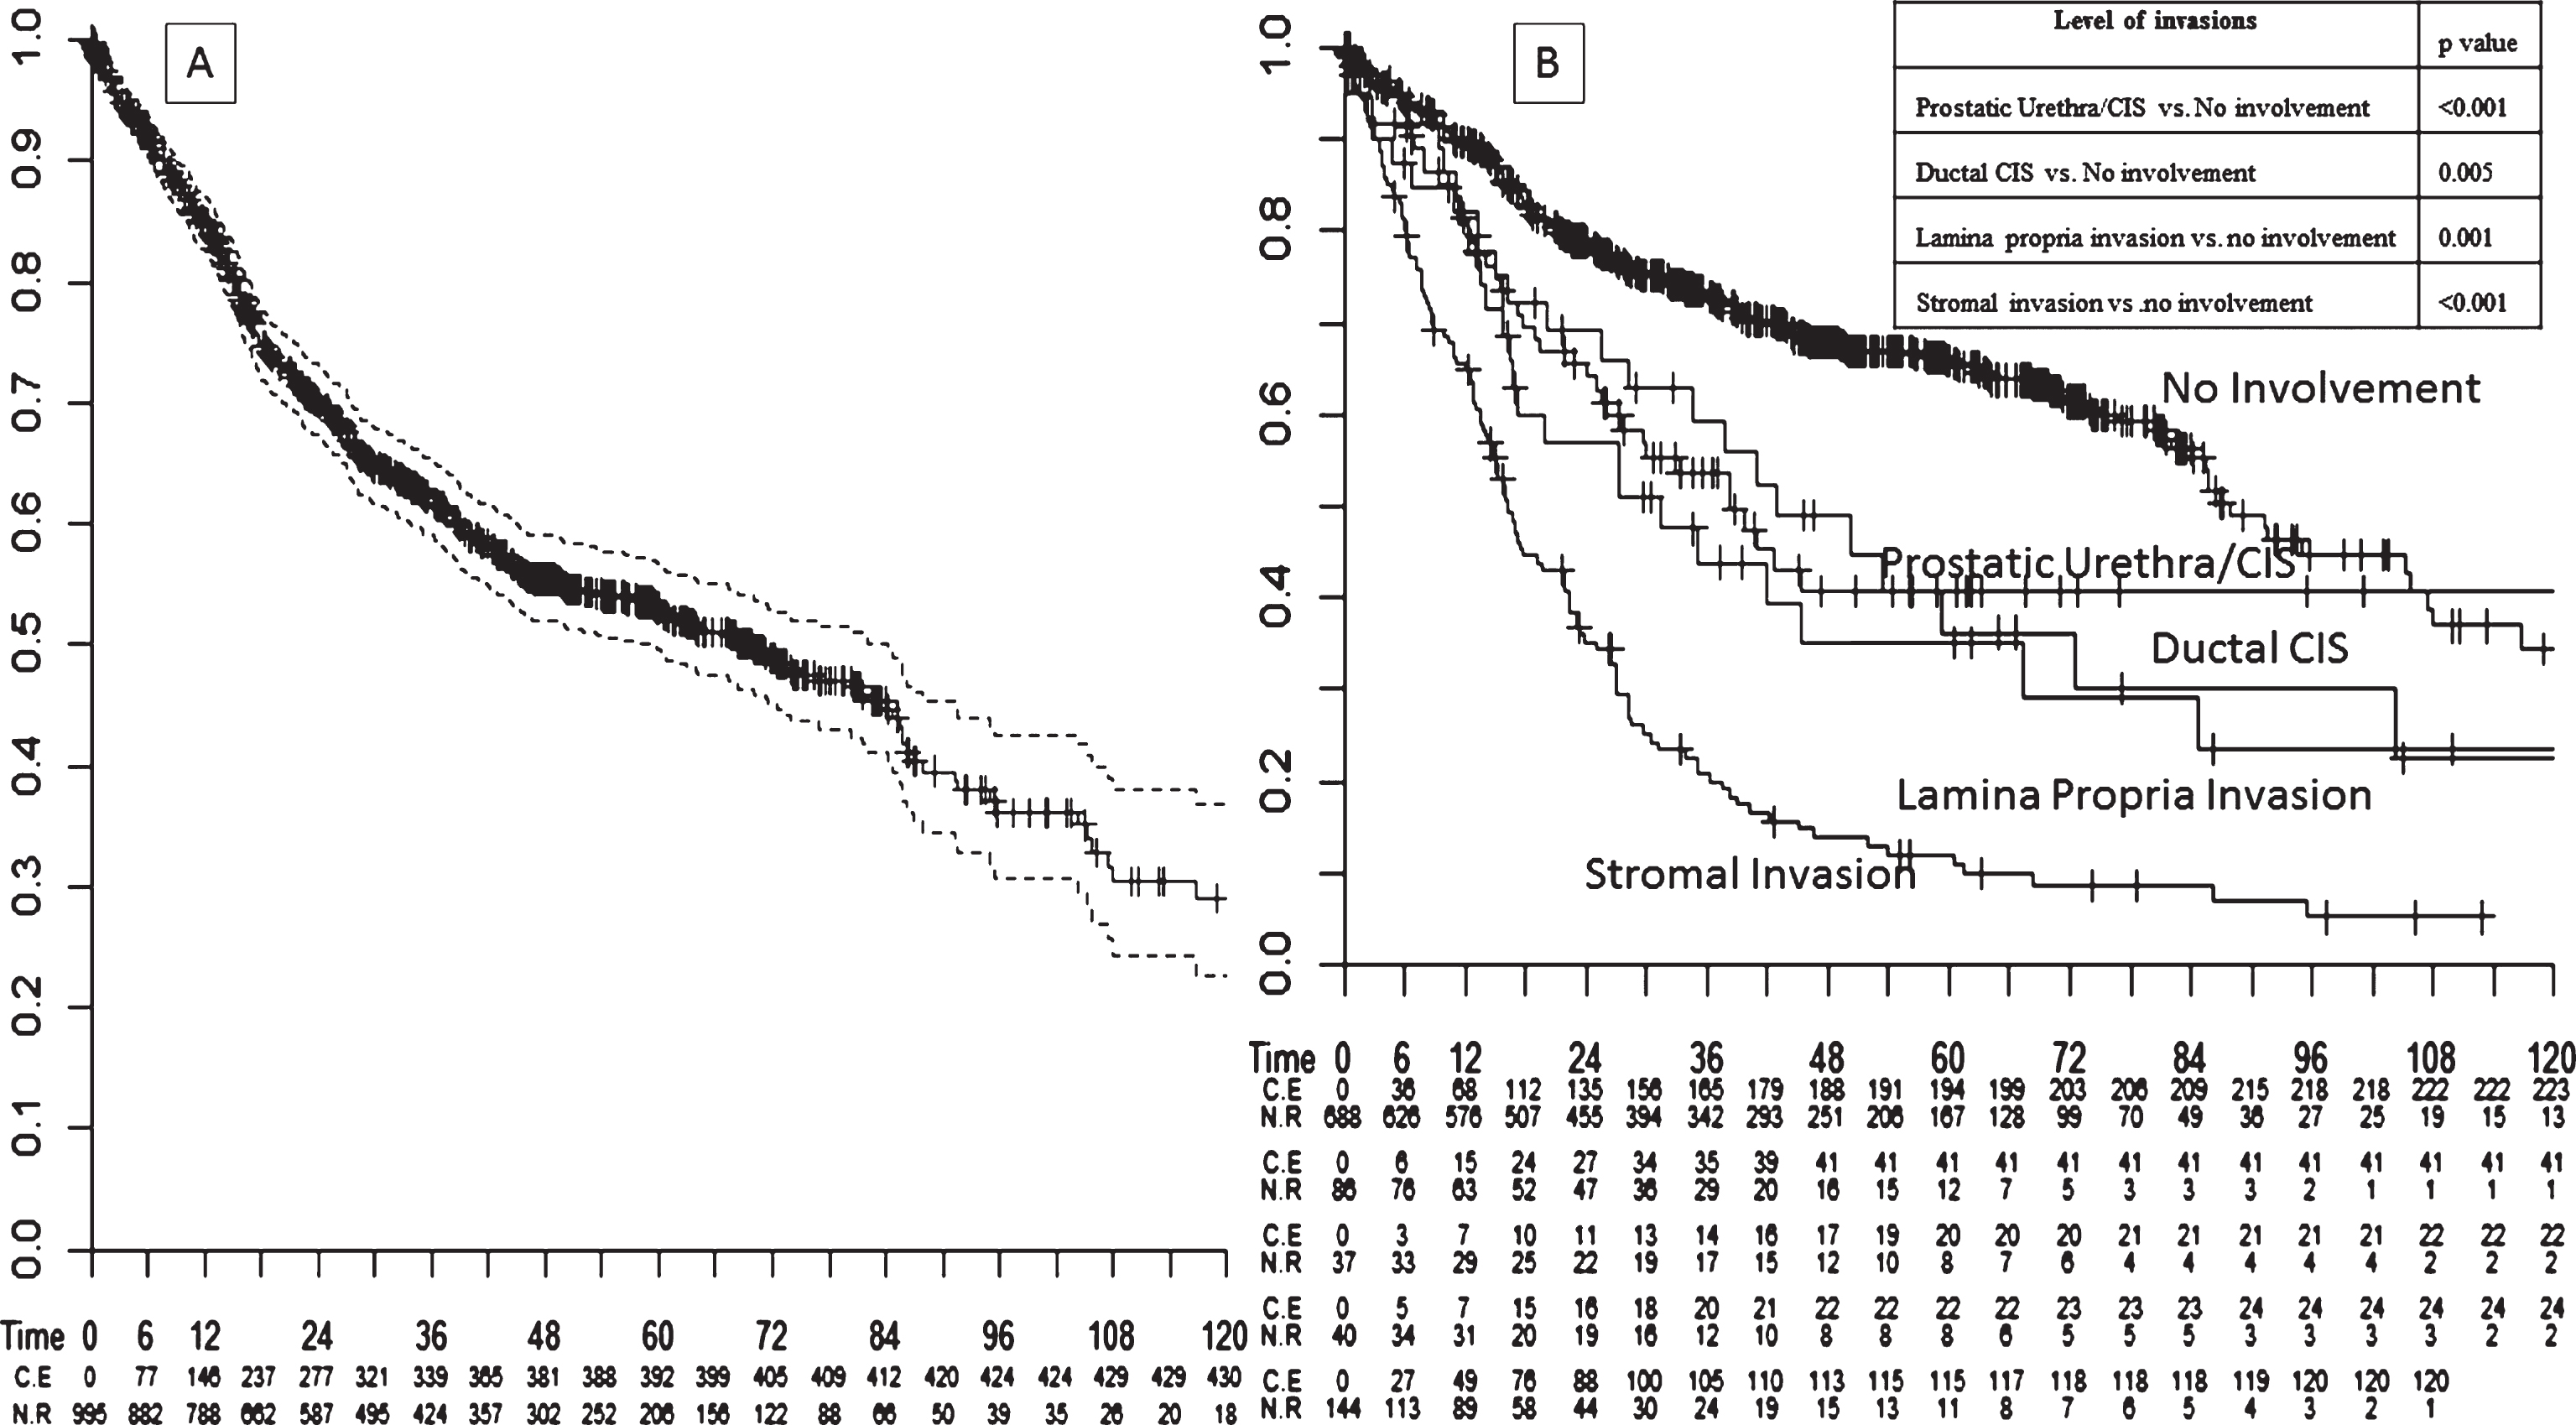 Kaplan-Meier survival analysis assessing (A) overall mortality -free rates in 995 bladder cancer patients treated with radical cystoprostatectomy. Analyses were repeated (B) after stratifying patients according to the level of prostatic invasion (no invasion vs. prostatic urethral CIS vs. lamina propria invasion vs. ductal CIS vs. stromal invasion).